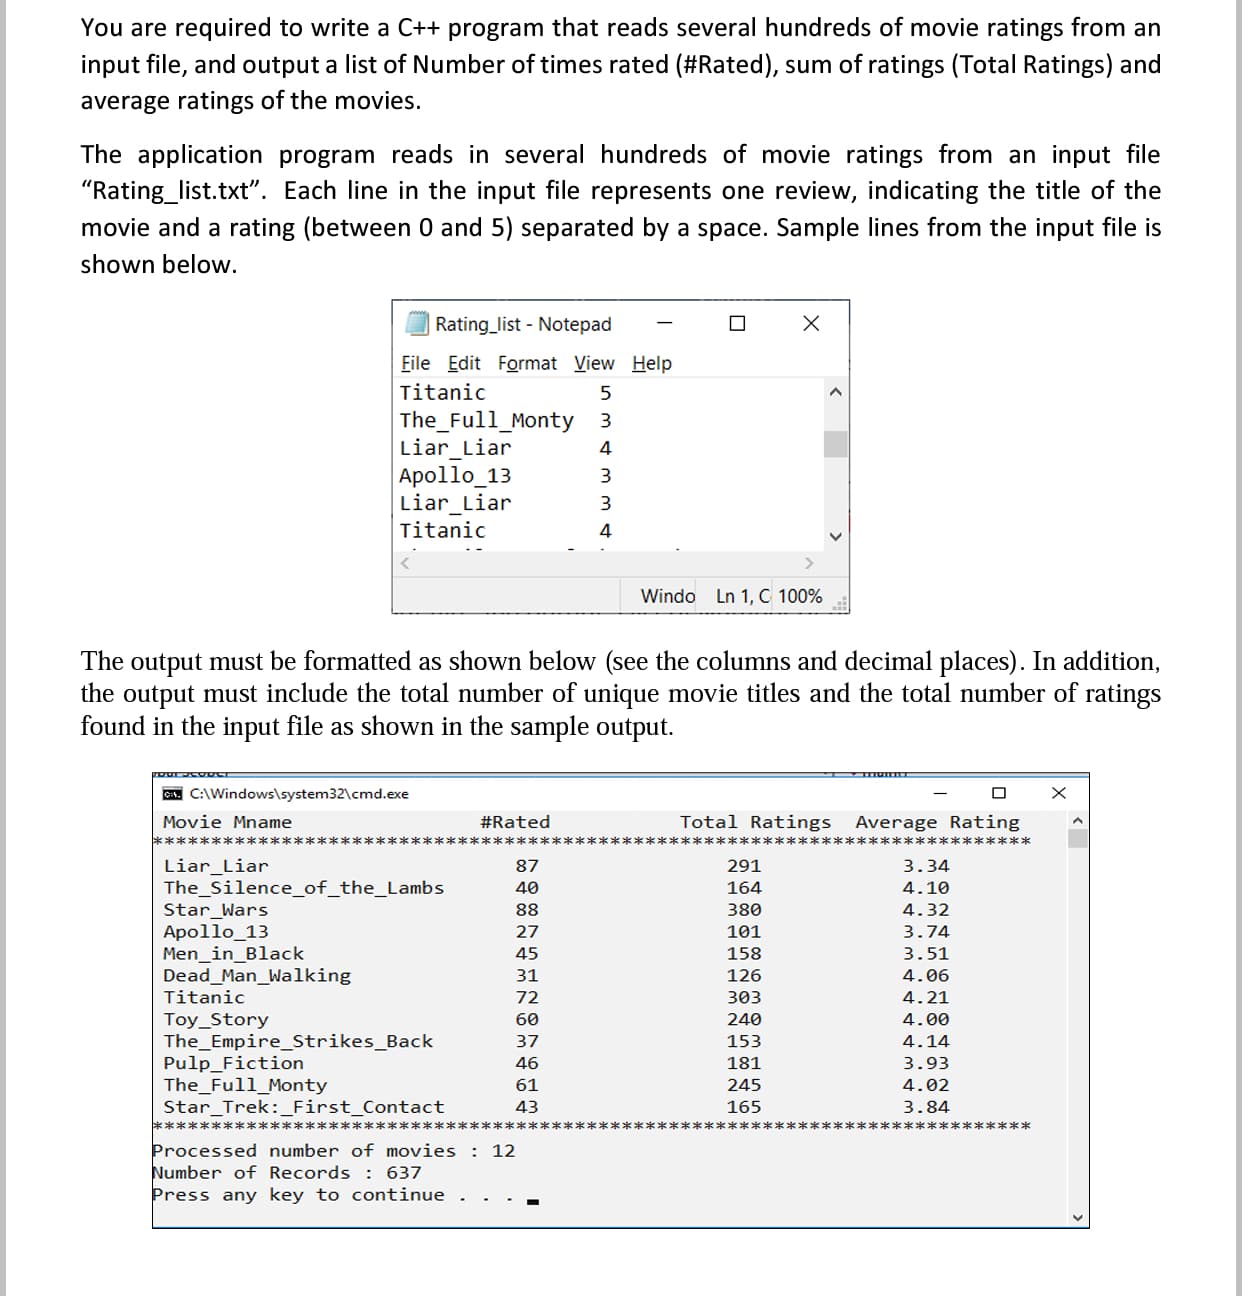 You are required to write a C++ program that reads several hundreds of movie ratings from an
input file, and output a list of Number of times rated (#Rated), sum of ratings (Total Ratings) and
average ratings of the movies.
The application program reads in several hundreds of movie ratings from an input file
"Rating_list.txt". Each line in the input file represents one review, indicating the title of the
movie and a rating (between 0 and 5) separated by a space. Sample lines from the input file is
shown below.
| Rating_list - Notepad
File Edit Format View Help
Titanic
5
The_Full_Monty
Liar_Liar
Apollo_13
Liar_Liar
Titanic
3
4
Windo Ln 1, C 100%
The output must be formatted as shown below (see the columns and decimal places). In addition,
the output must include the total number of unique movie titles and the total number of ratings
found in the input file as shown in the sample output.
C. C:\Windows\system32\cmd.exe
Movie Mname
#Rated
Total Ratings Average Rating
**************
**********
Liar_Liar
The Silence_of_the_Lambs
Star_Wars
Apollo_13
Men_in_Black
Dead_Man_Walking
Titanic
87
291
3.34
40
164
4.10
88
380
4.32
27
101
3.74
45
158
3.51
4.06
4.21
31
126
303
72
Toy_Story
The Empire_Strikes_Back
Pulp_Fiction
The_Full_Monty
Star_Trek:_First_Contact
**********************
60
240
4.00
37
153
4.14
46
181
3.93
61
245
4.02
43
165
3.84
*****
k****k ***
******
********
Þrocessed number of movies : 12
Number of Records : 637
Press any key to continue
